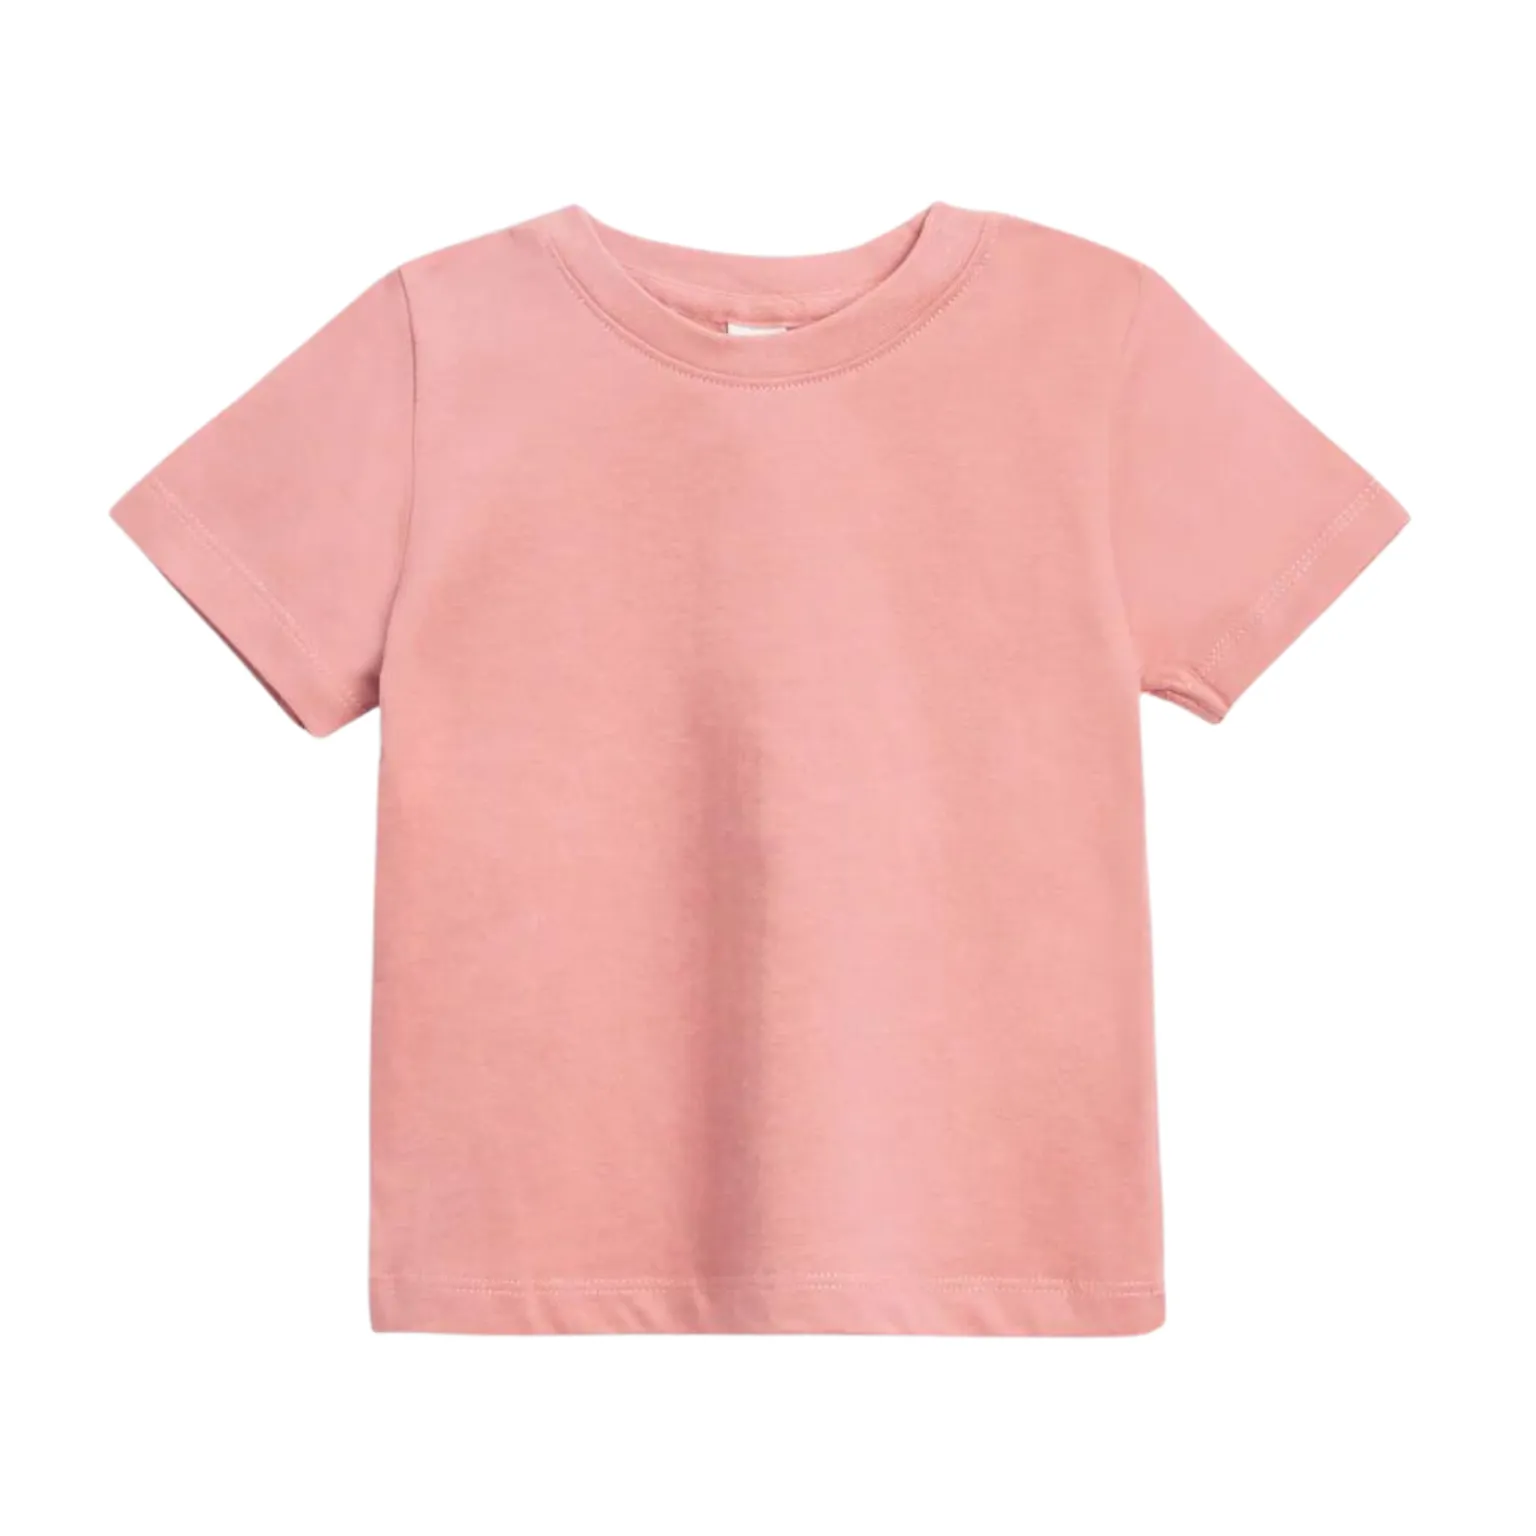 Benefit from our service offering competitive prices for Baby T-Shirt.